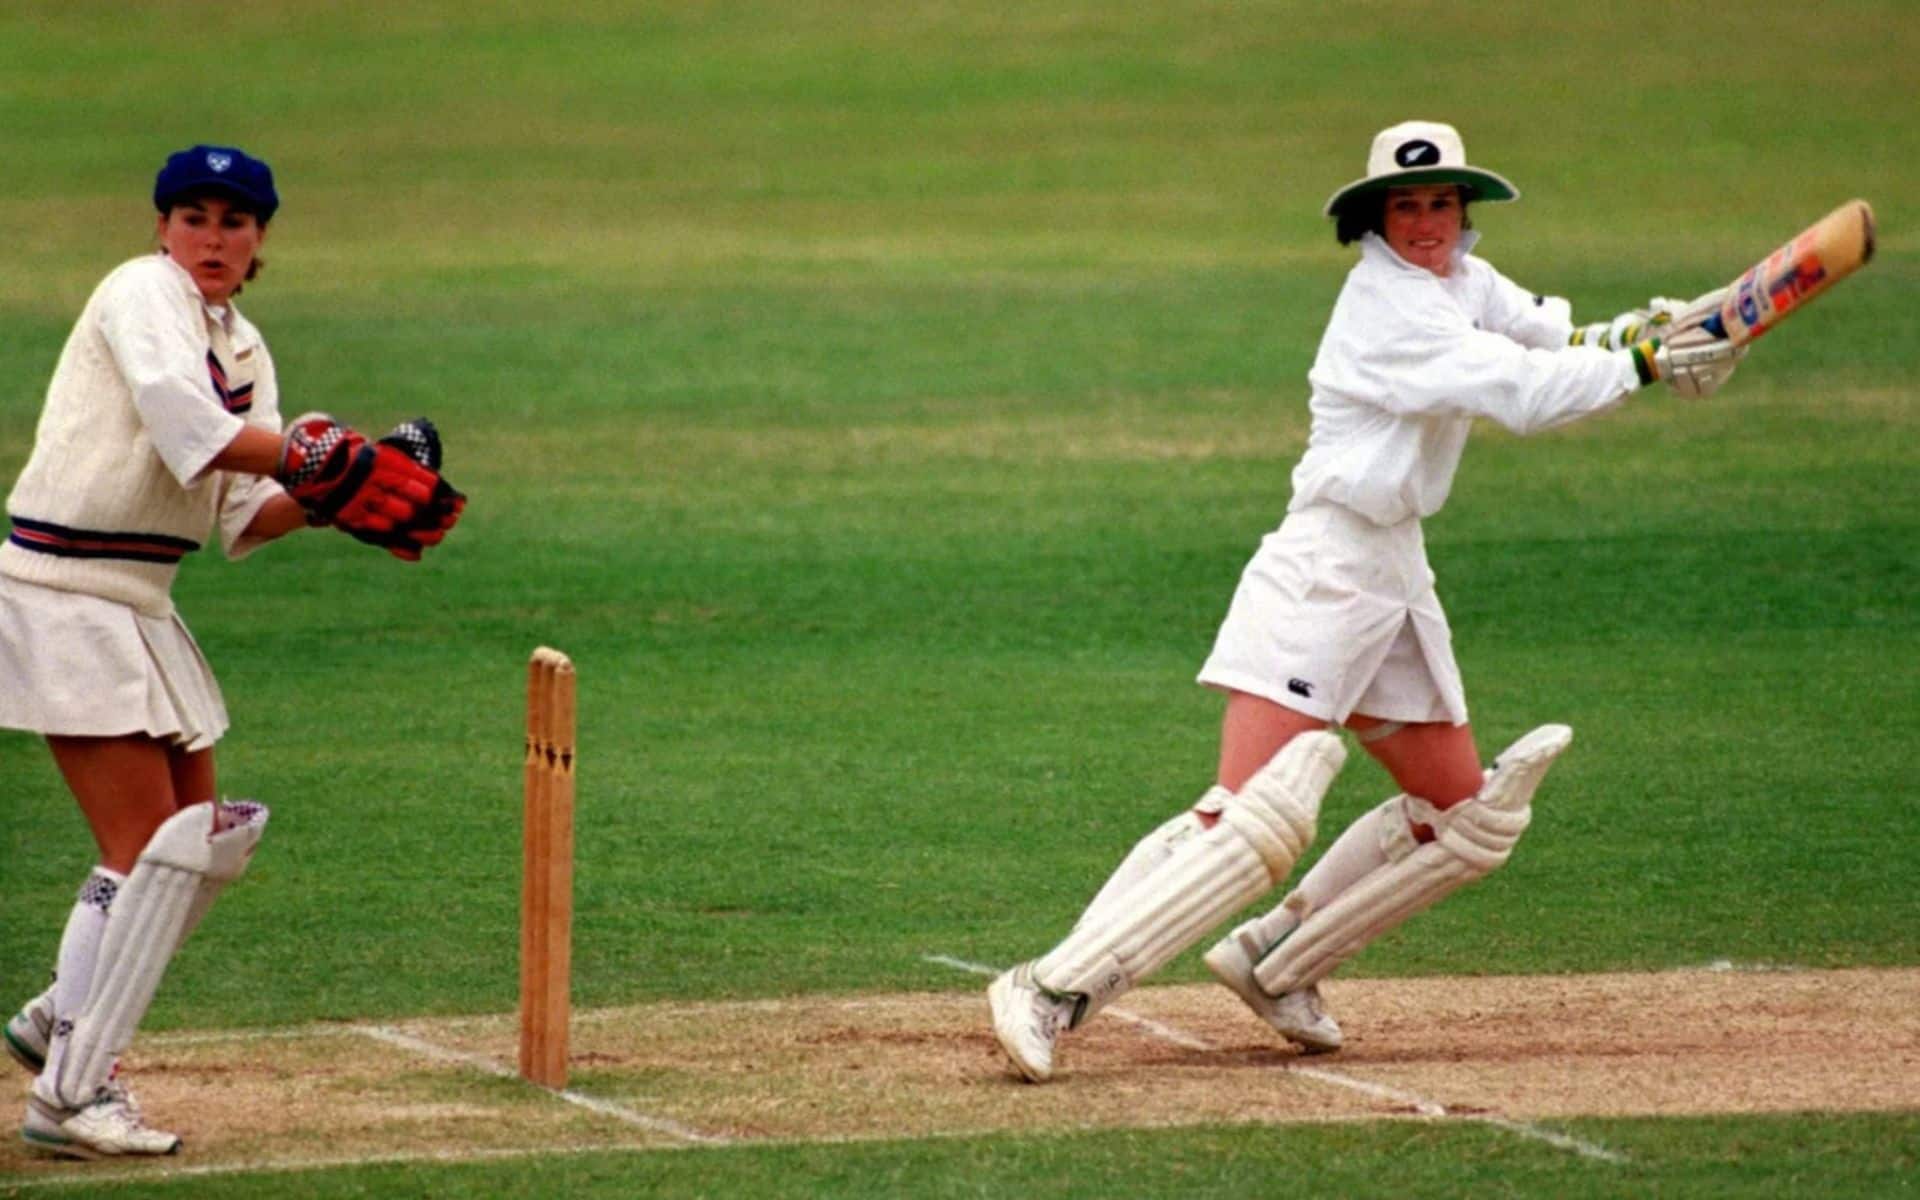 Kirsty Bond cracked the first-ever women's double ton (x.com)